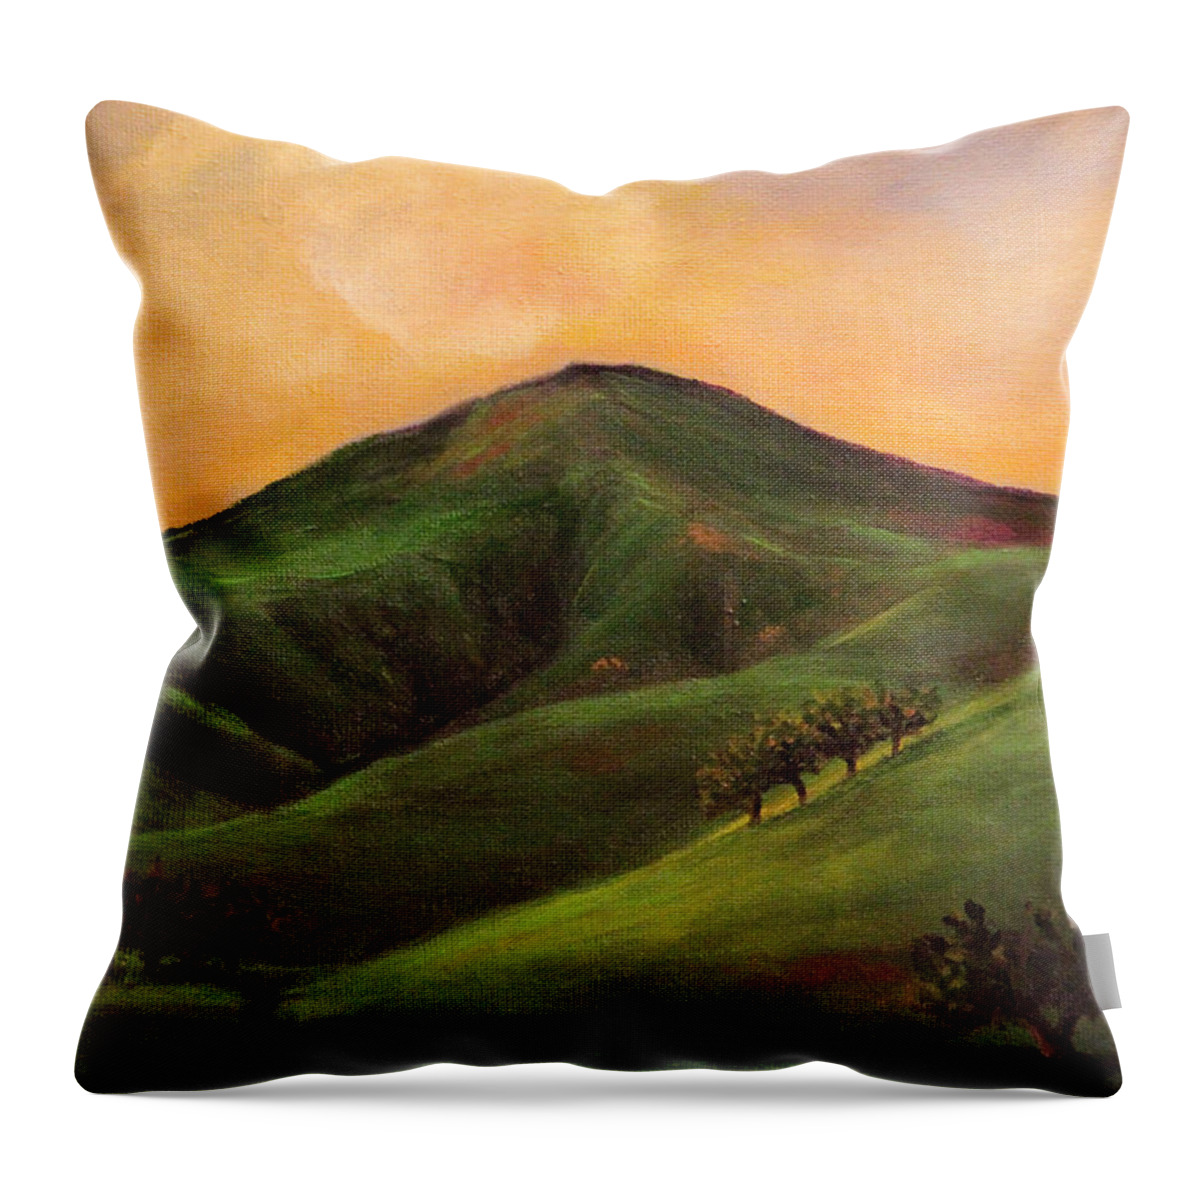 Hills Throw Pillow featuring the painting Velvet Hills and Orange Sherbet Skies by Janet Greer Sammons